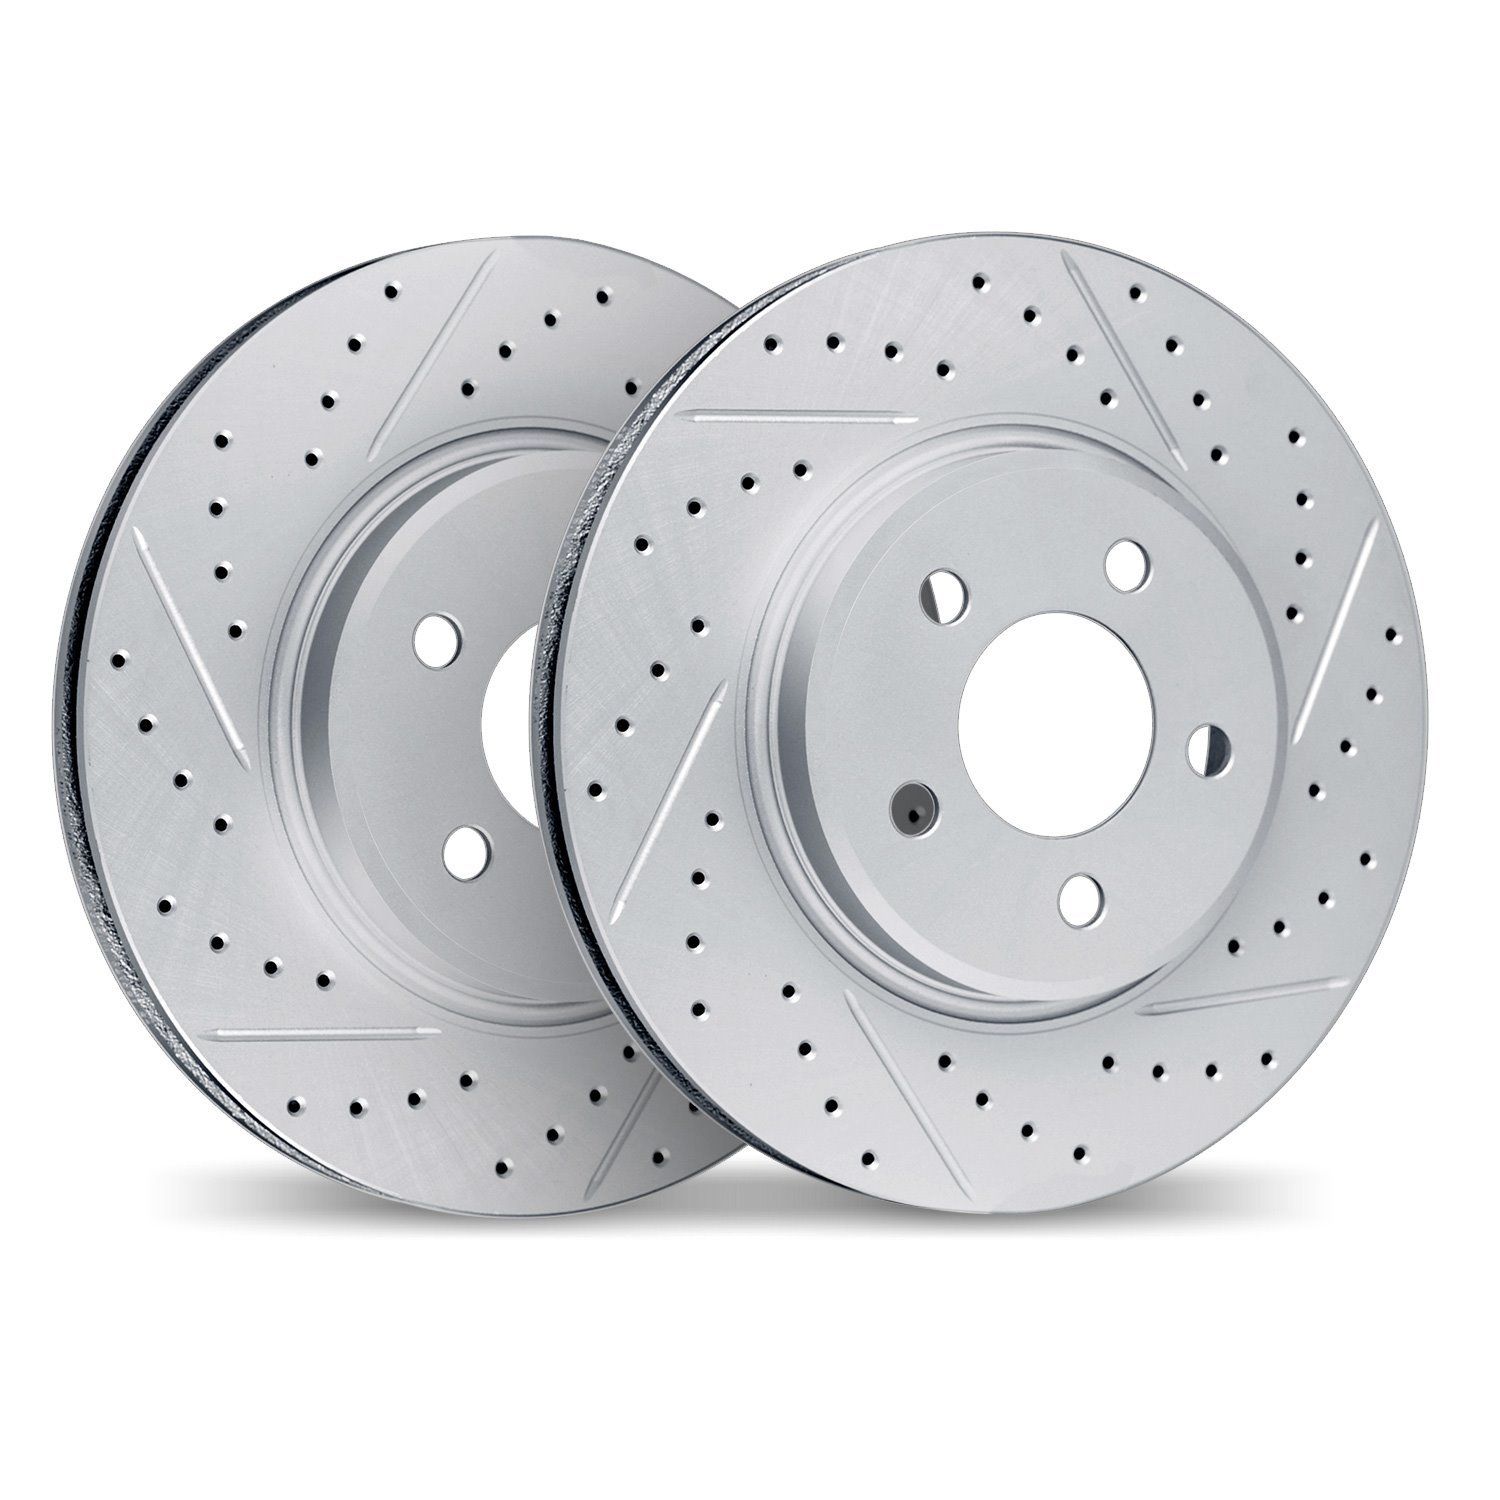 2002-31083 Geoperformance Drilled/Slotted Brake Rotors, 2005-2008 BMW, Position: Rear